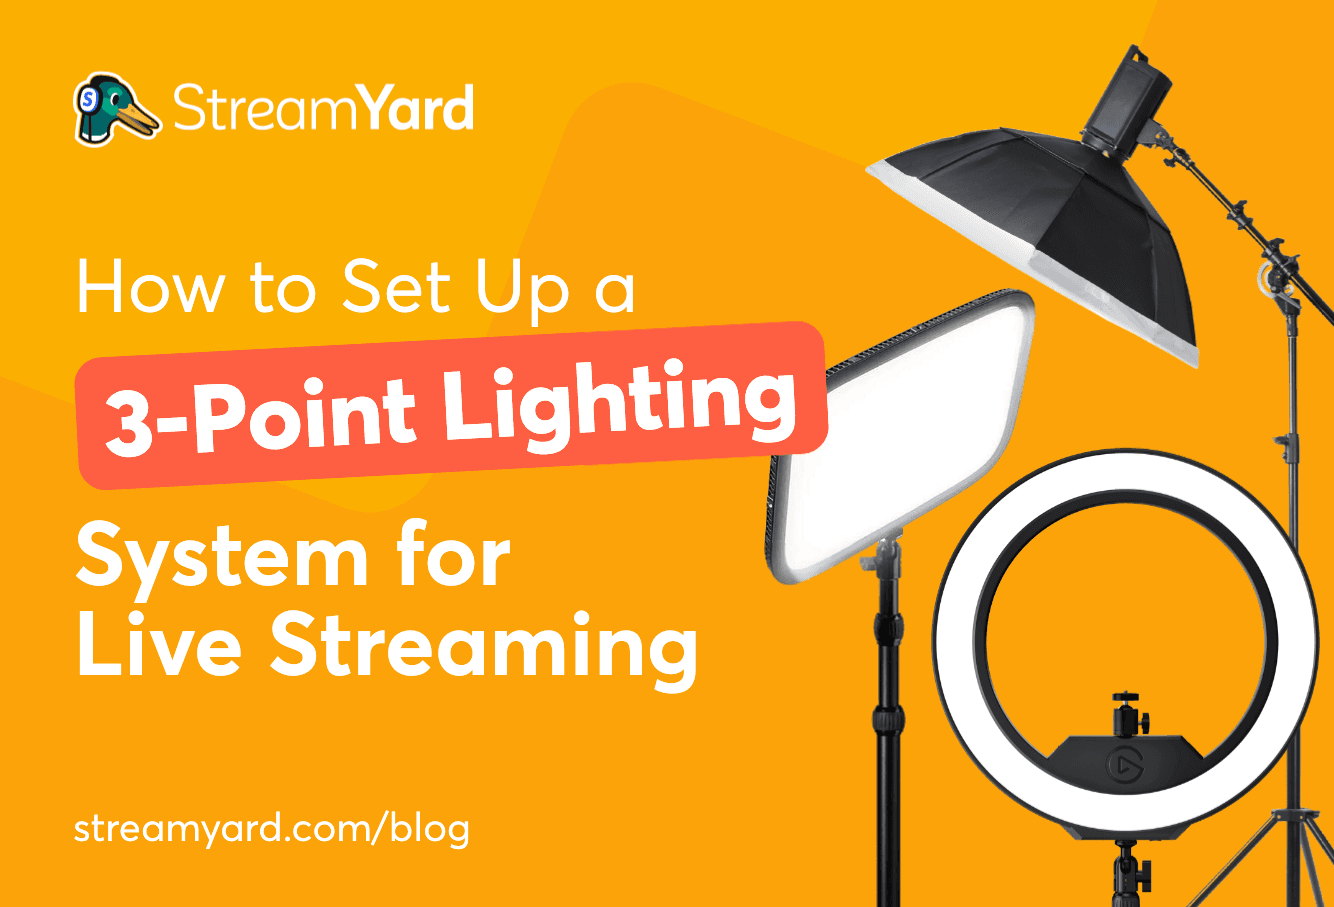 Learn how to set up a three-point lighting system for your next live stream or recorded video with this easy-to-follow, step-by-step guide.